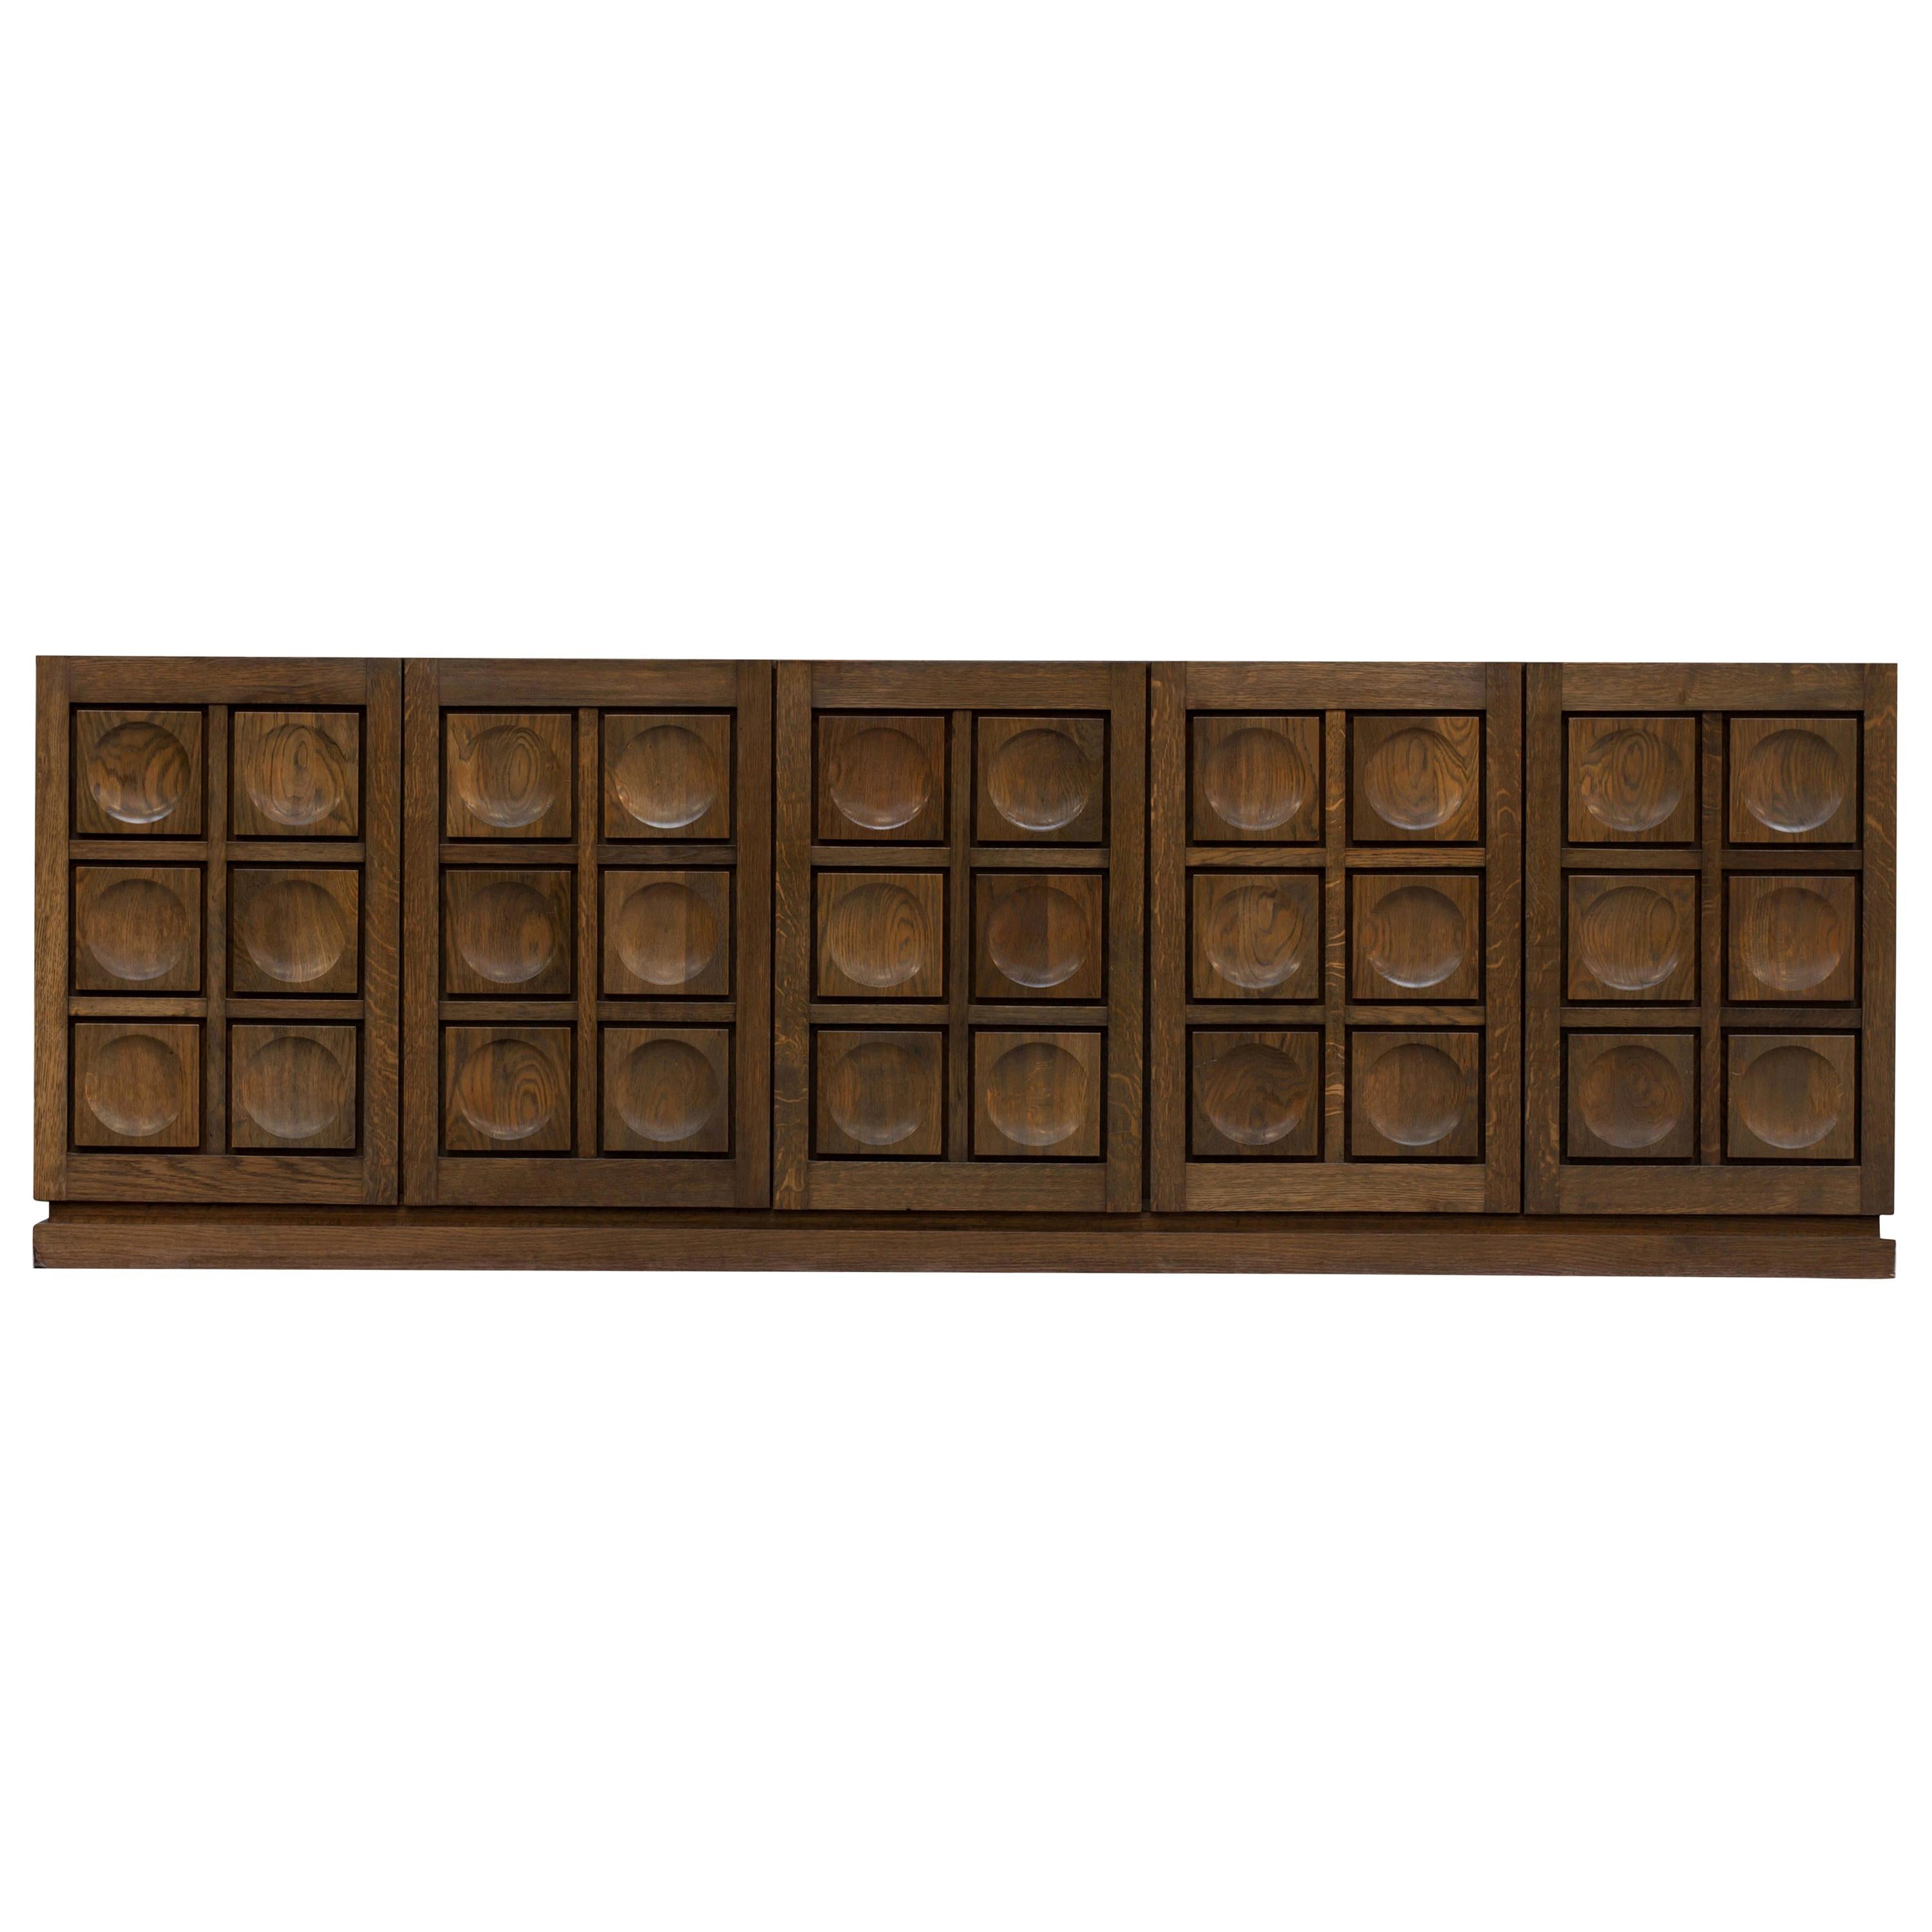 Mid-Century Modern Brutalist sideboard, the 1970s

Geometrical door panels are typical for the era.
The grain of the oak really jumps to the eye.

Would fit well in a Hollywood Regency decor as in a more naturalist interior

Check out our